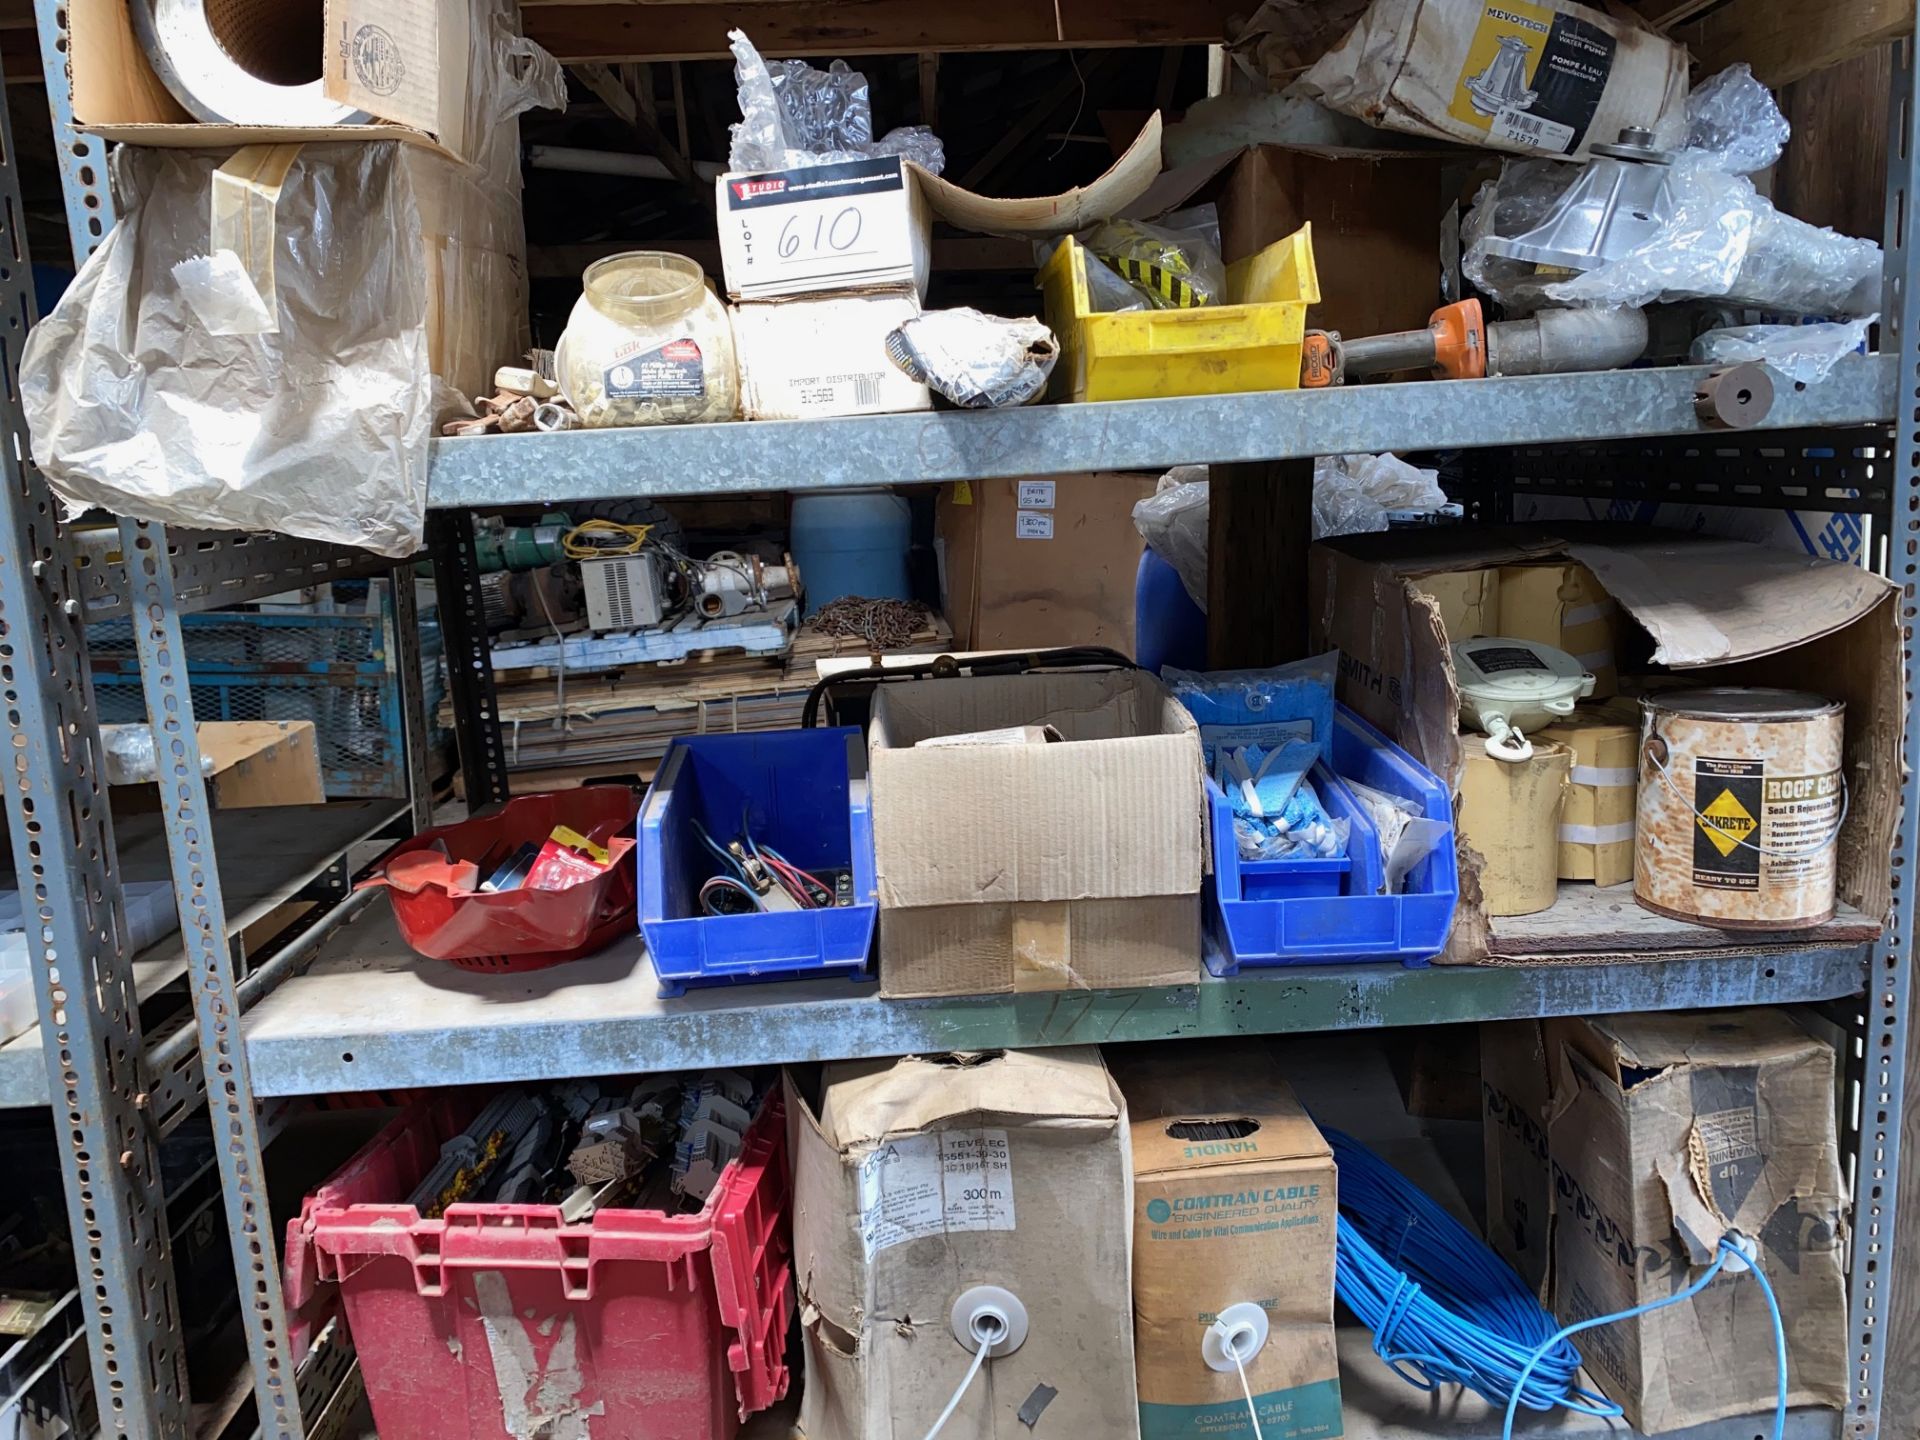 LOT CONSISTING OF COMMUNICATION WIRES, WATER PUMPS, DISTRIBUTORS, DIN CONNECTORS, TOOL BALANCER - Image 12 of 13